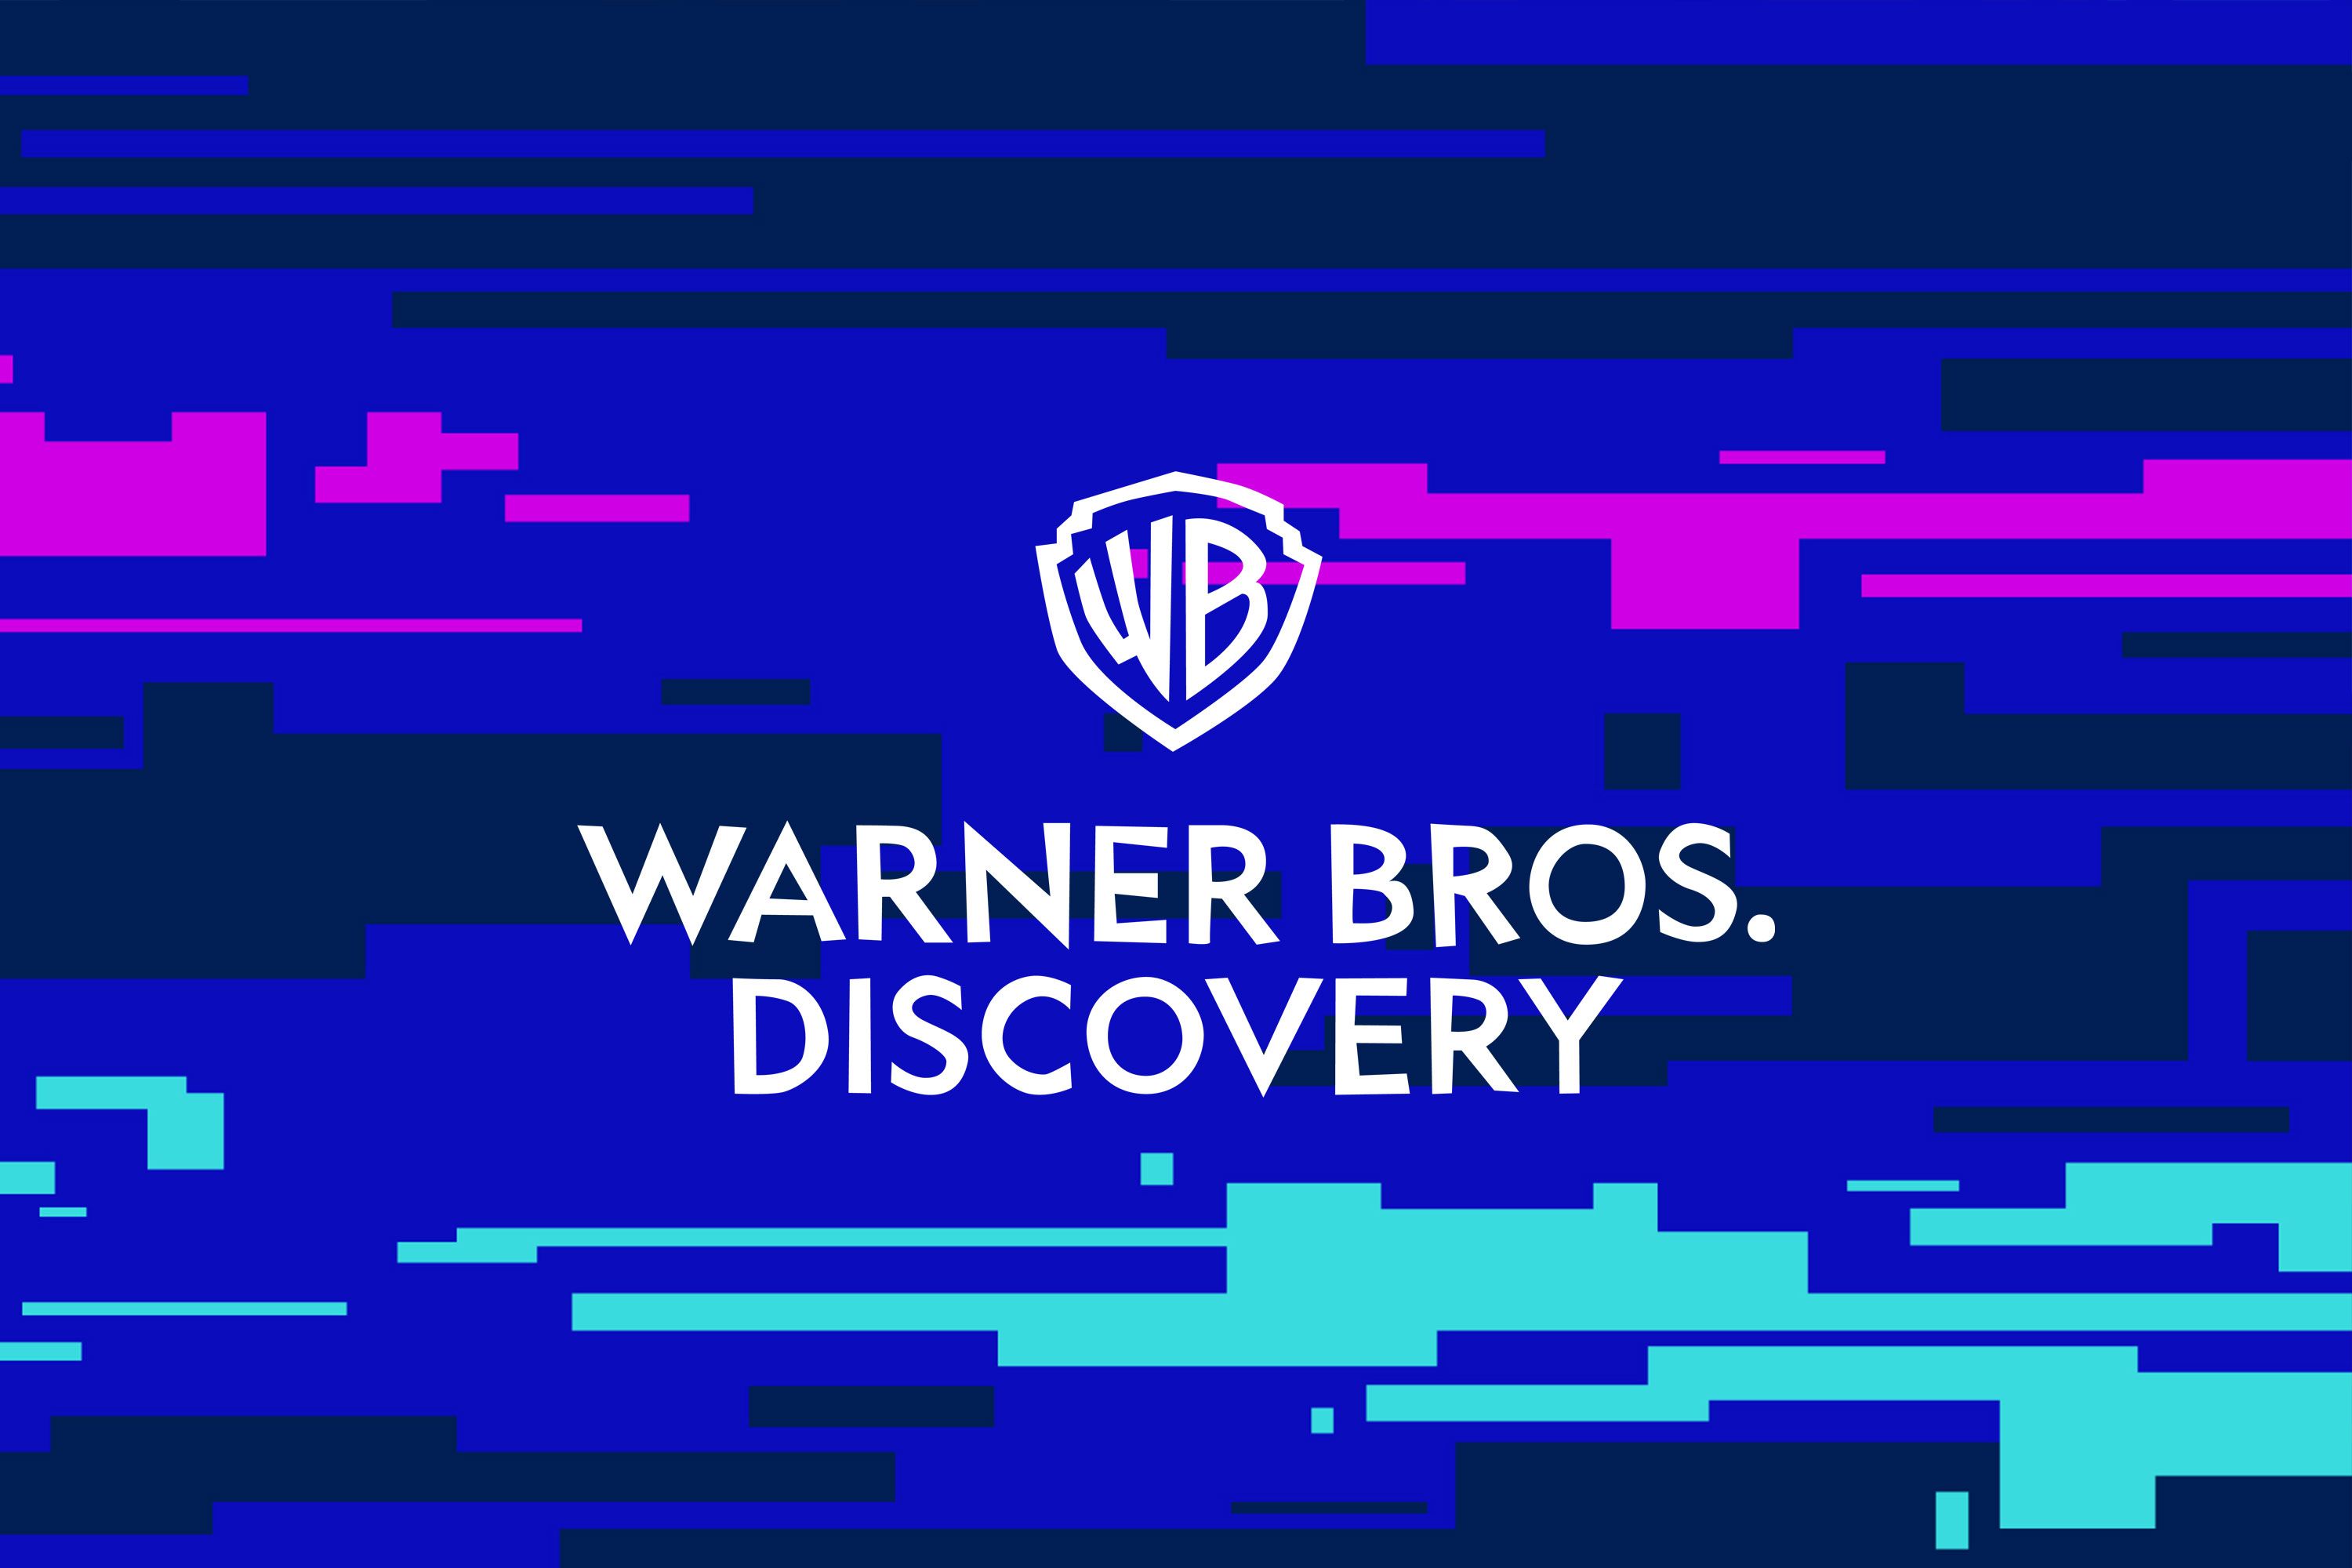 Cartoon Network's future in doubt as Warner Bros. Discovery cuts costs